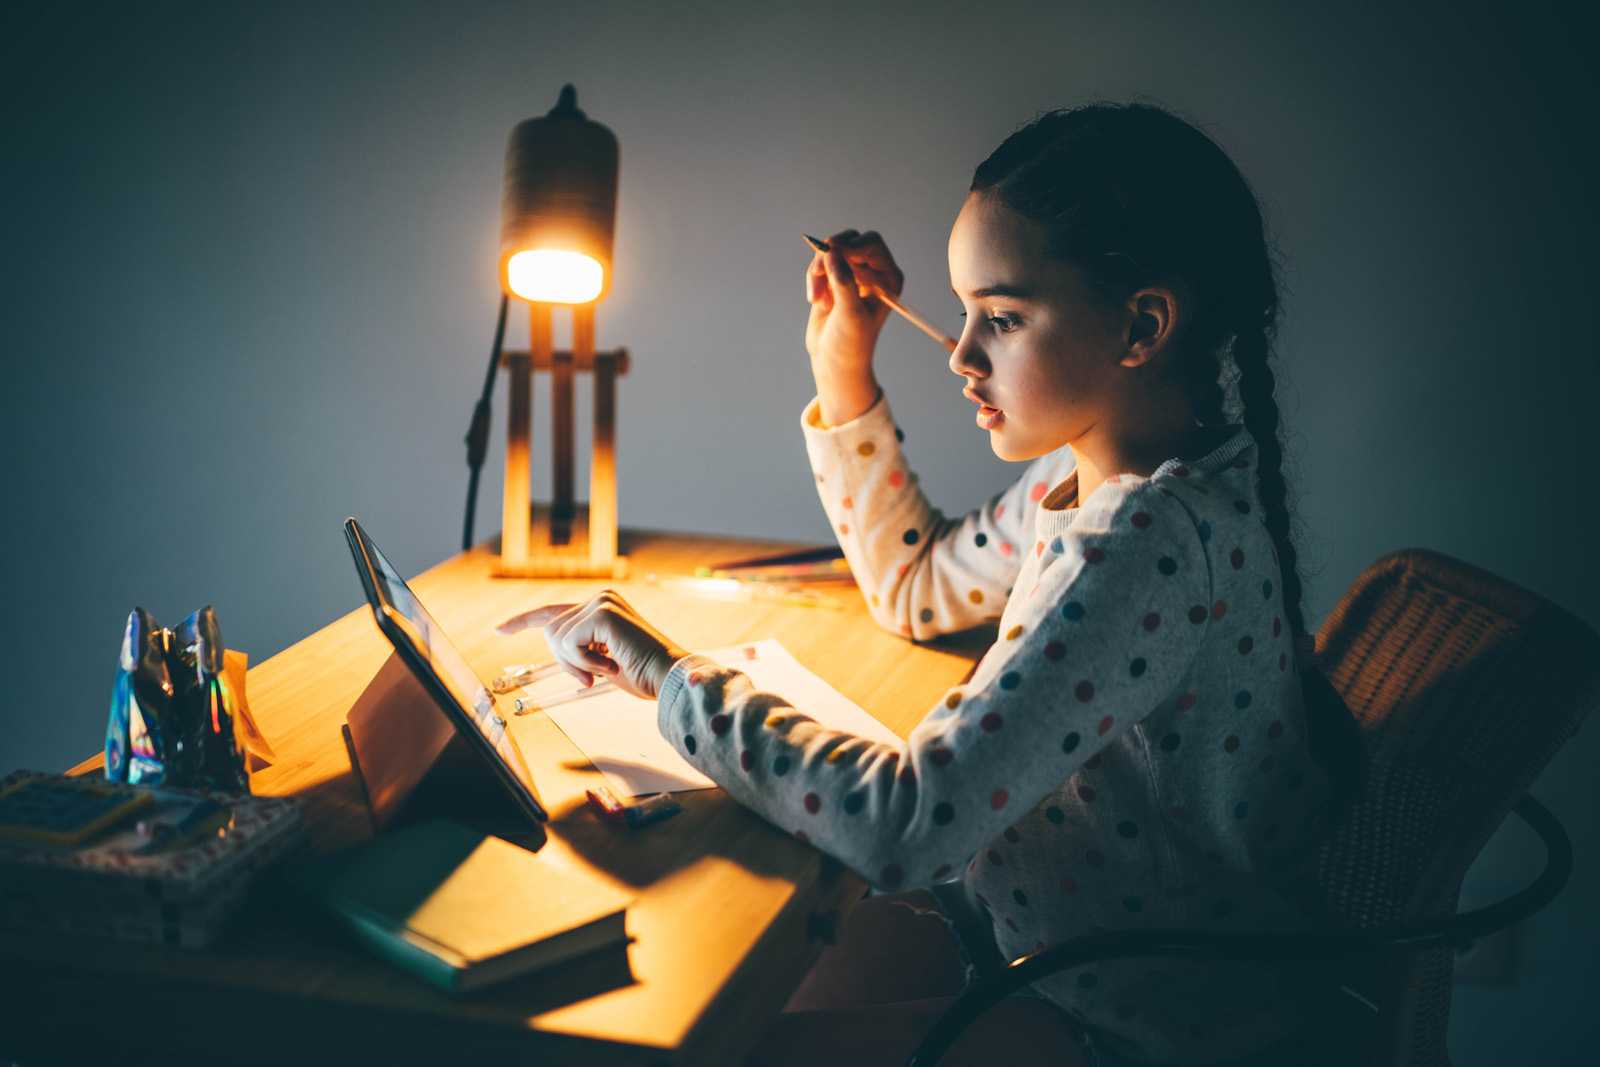 girl sitting at desk at night with lamp on, completing lesson on a tablet and work book